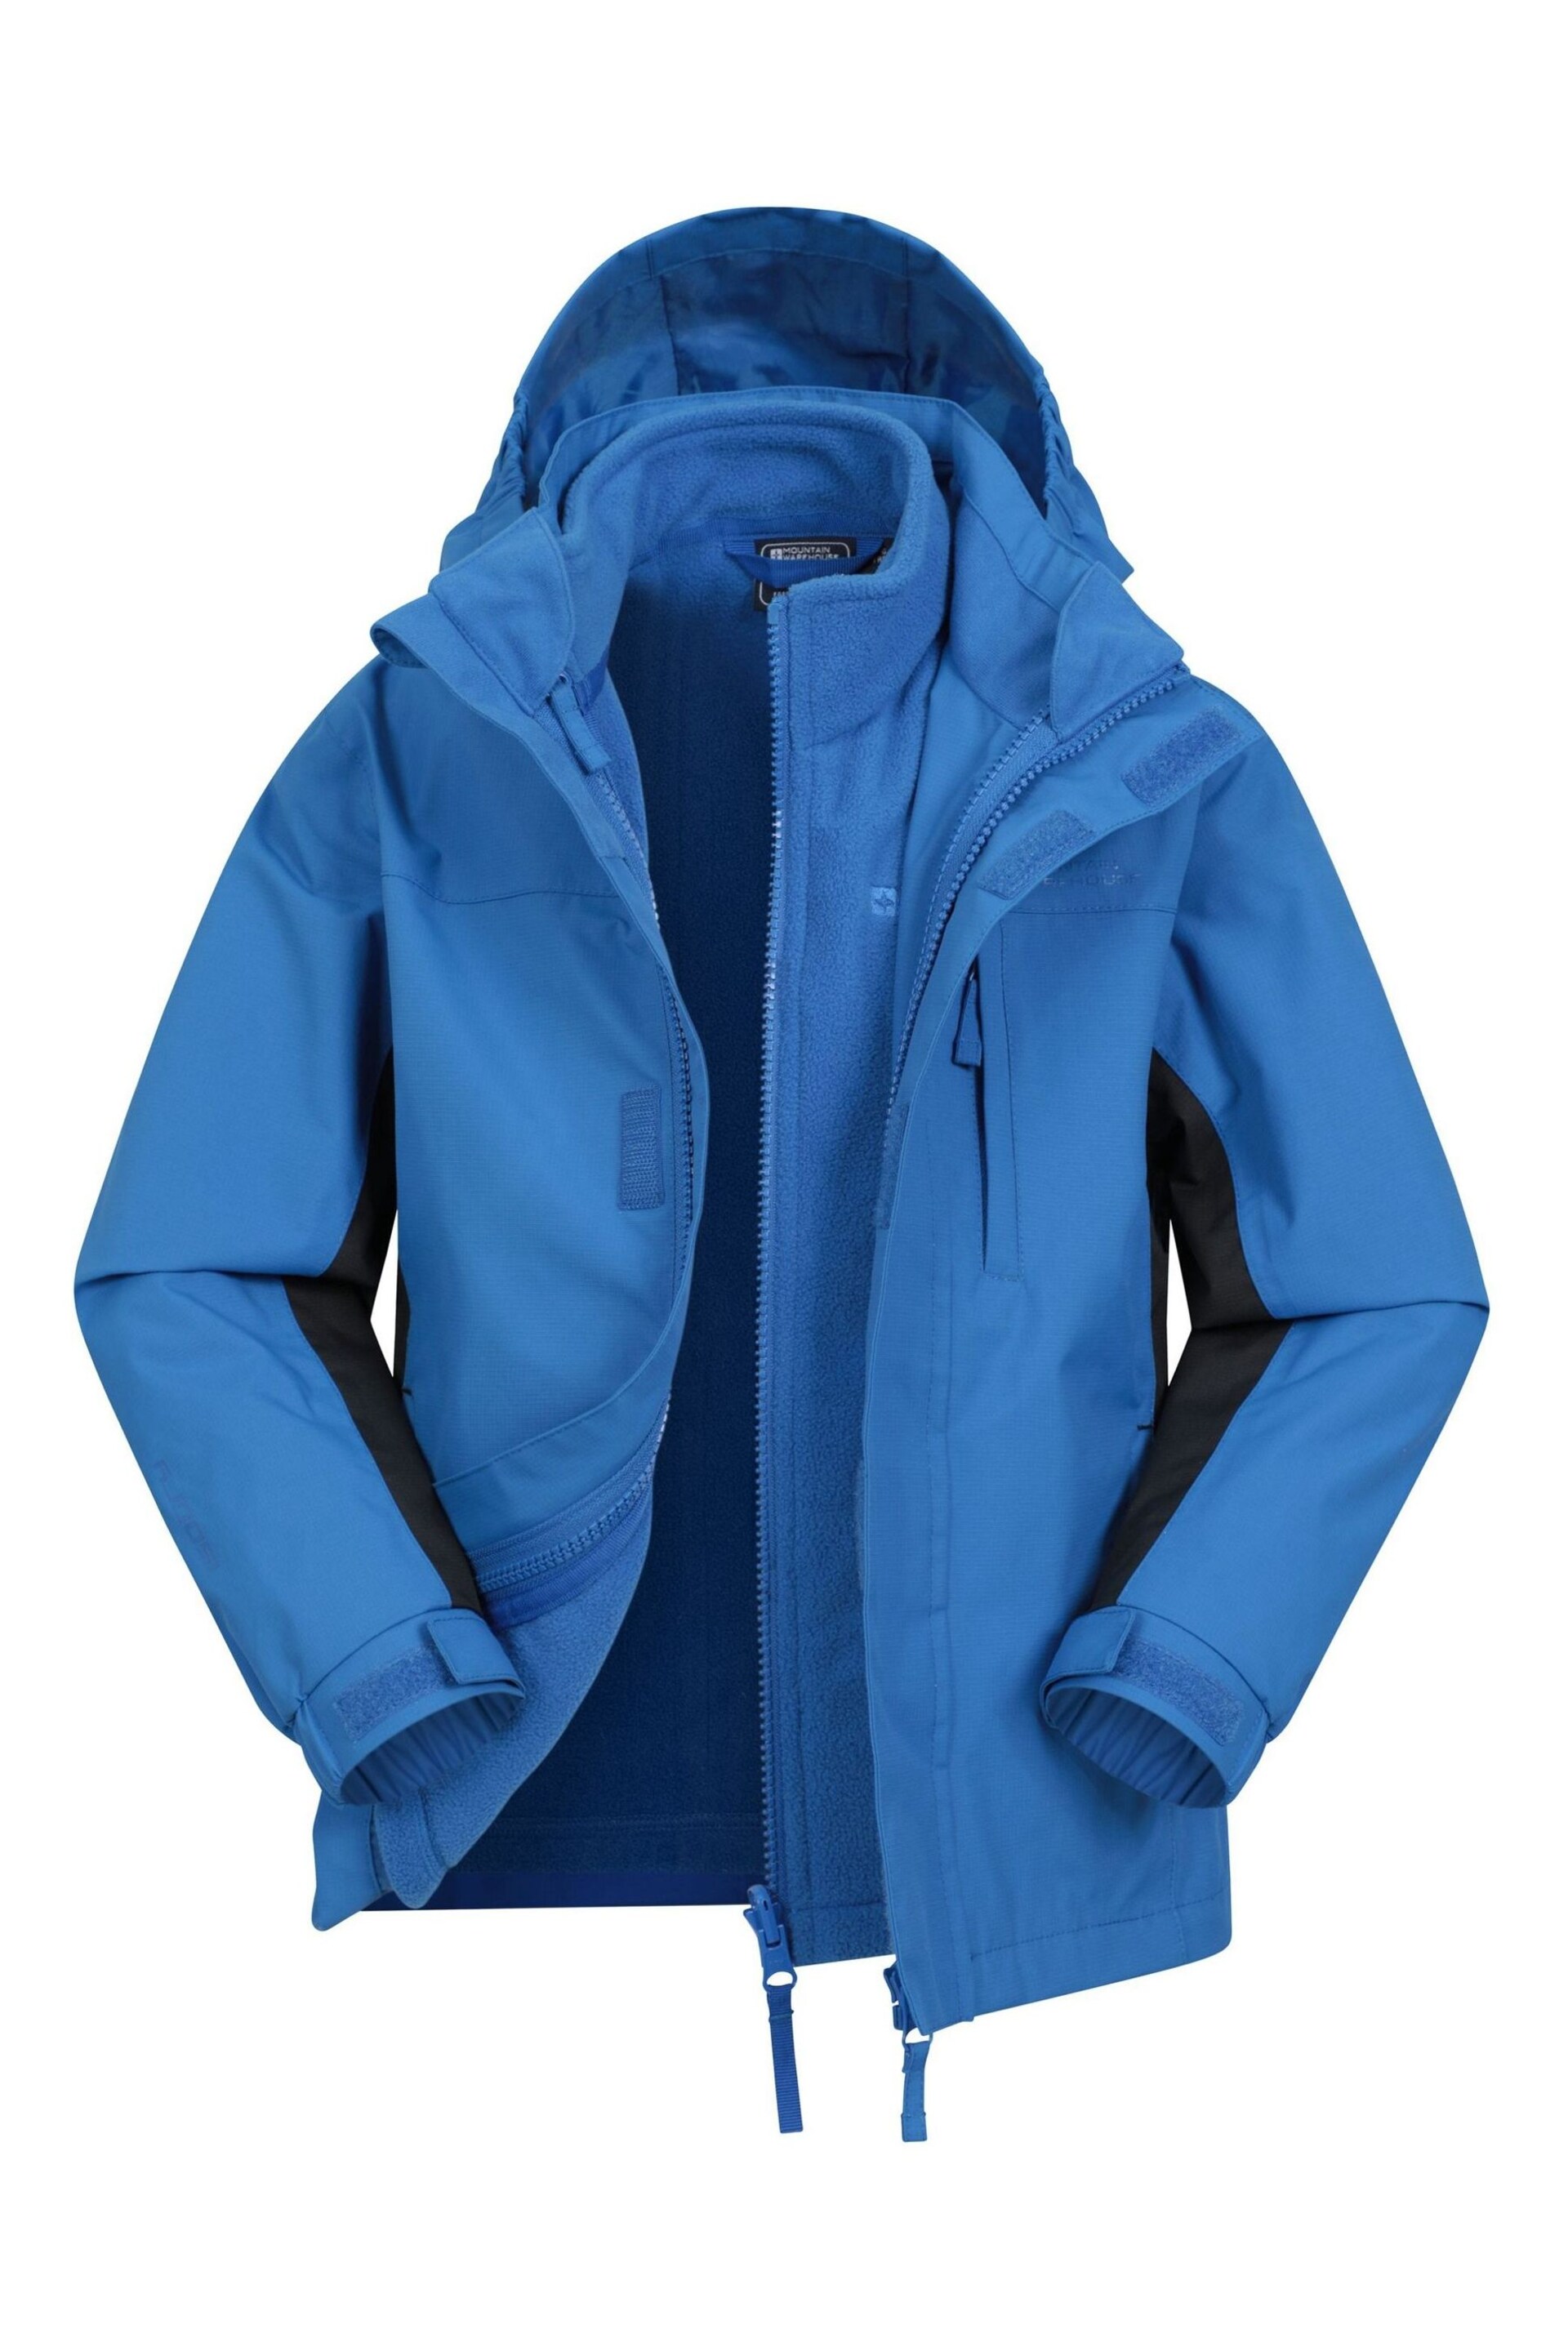 Mountain Warehouse Blue Kids Cannonball 3 in 1 Breathable and Waterproof Jacket - Image 1 of 5